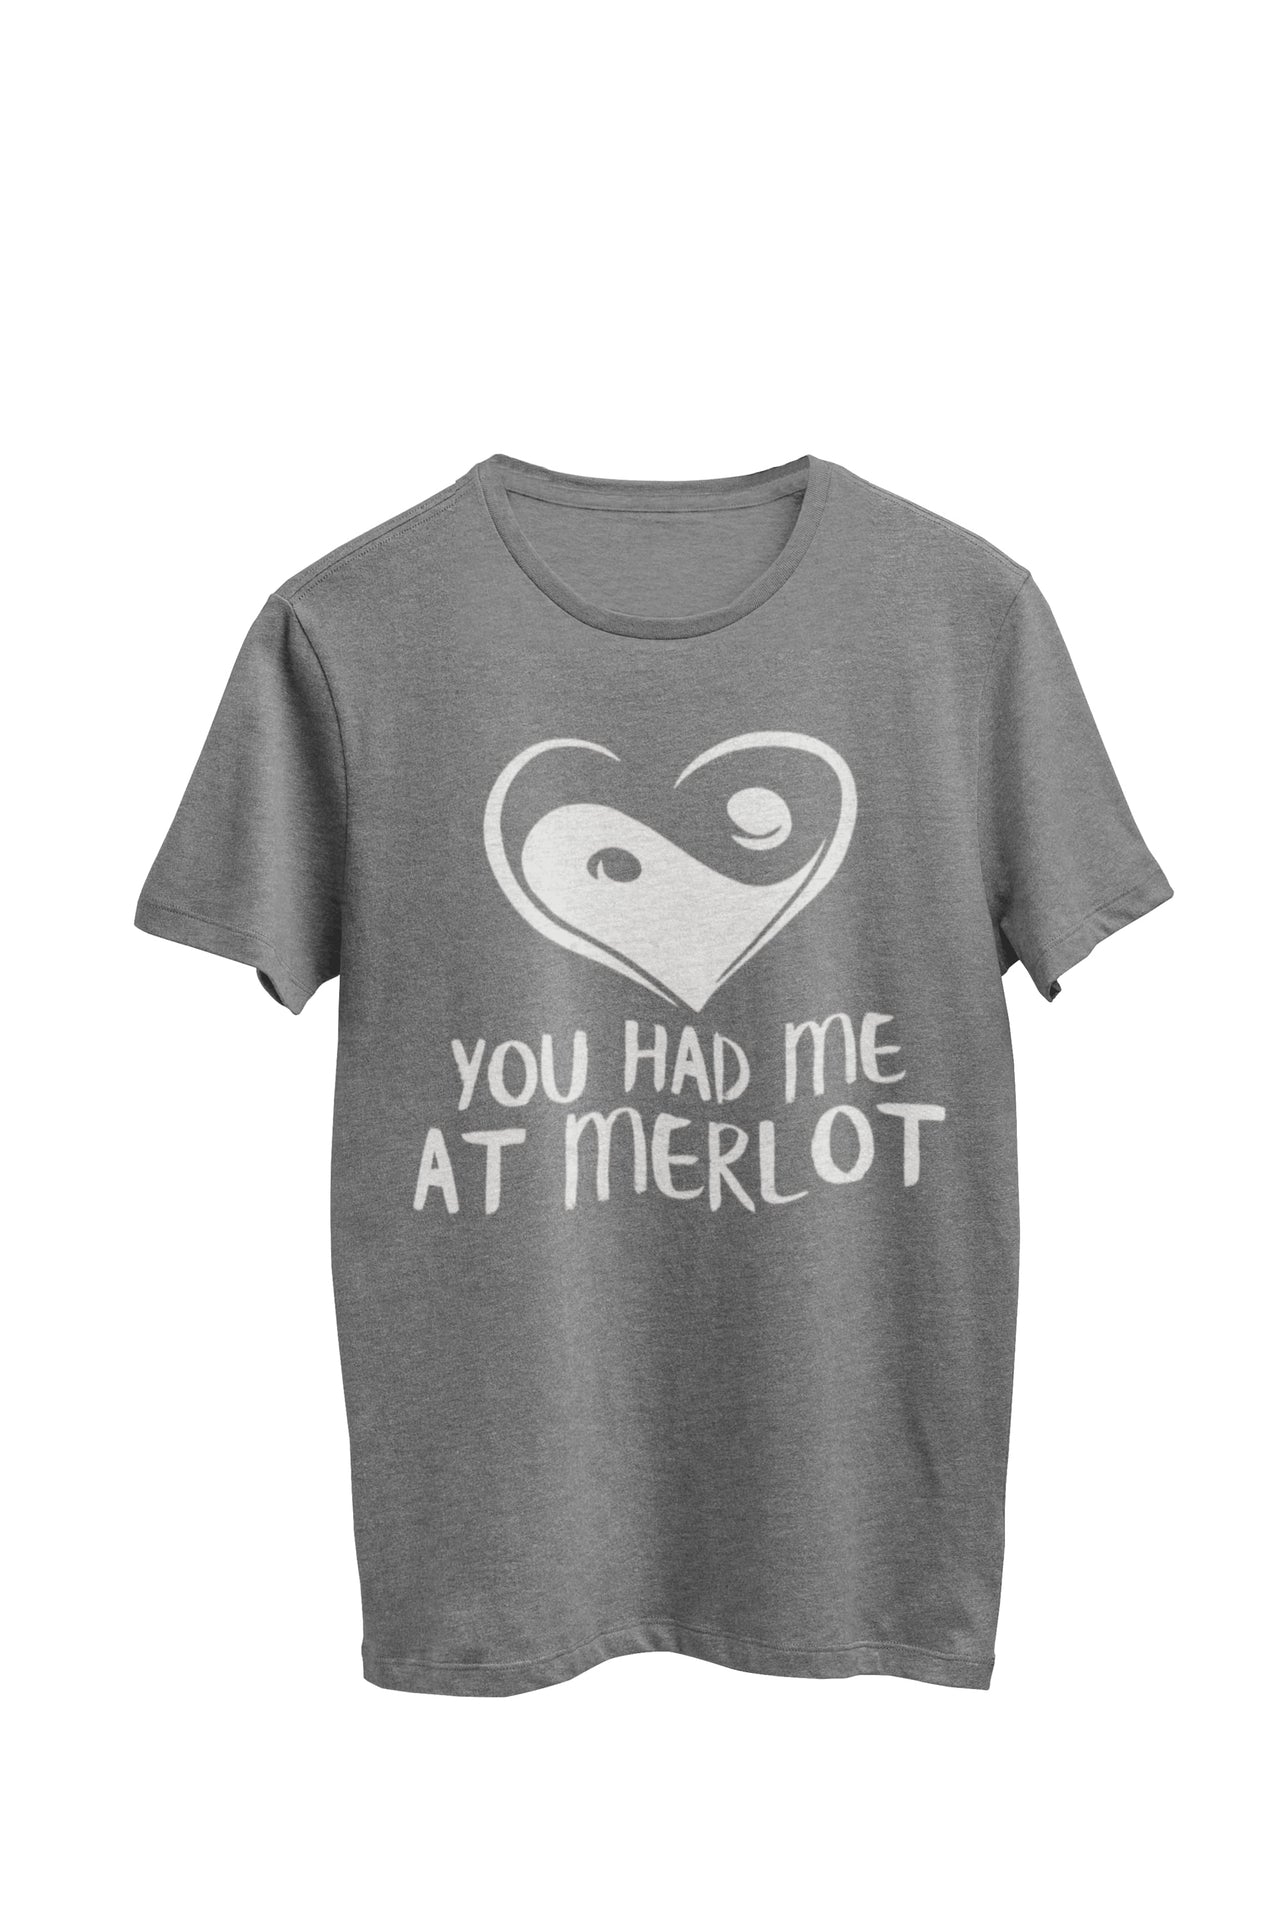 Heather Gray Unisex T-Shirt with heart yin yang symbol and text 'you had me at merlot,' by WooHoo Apparel."